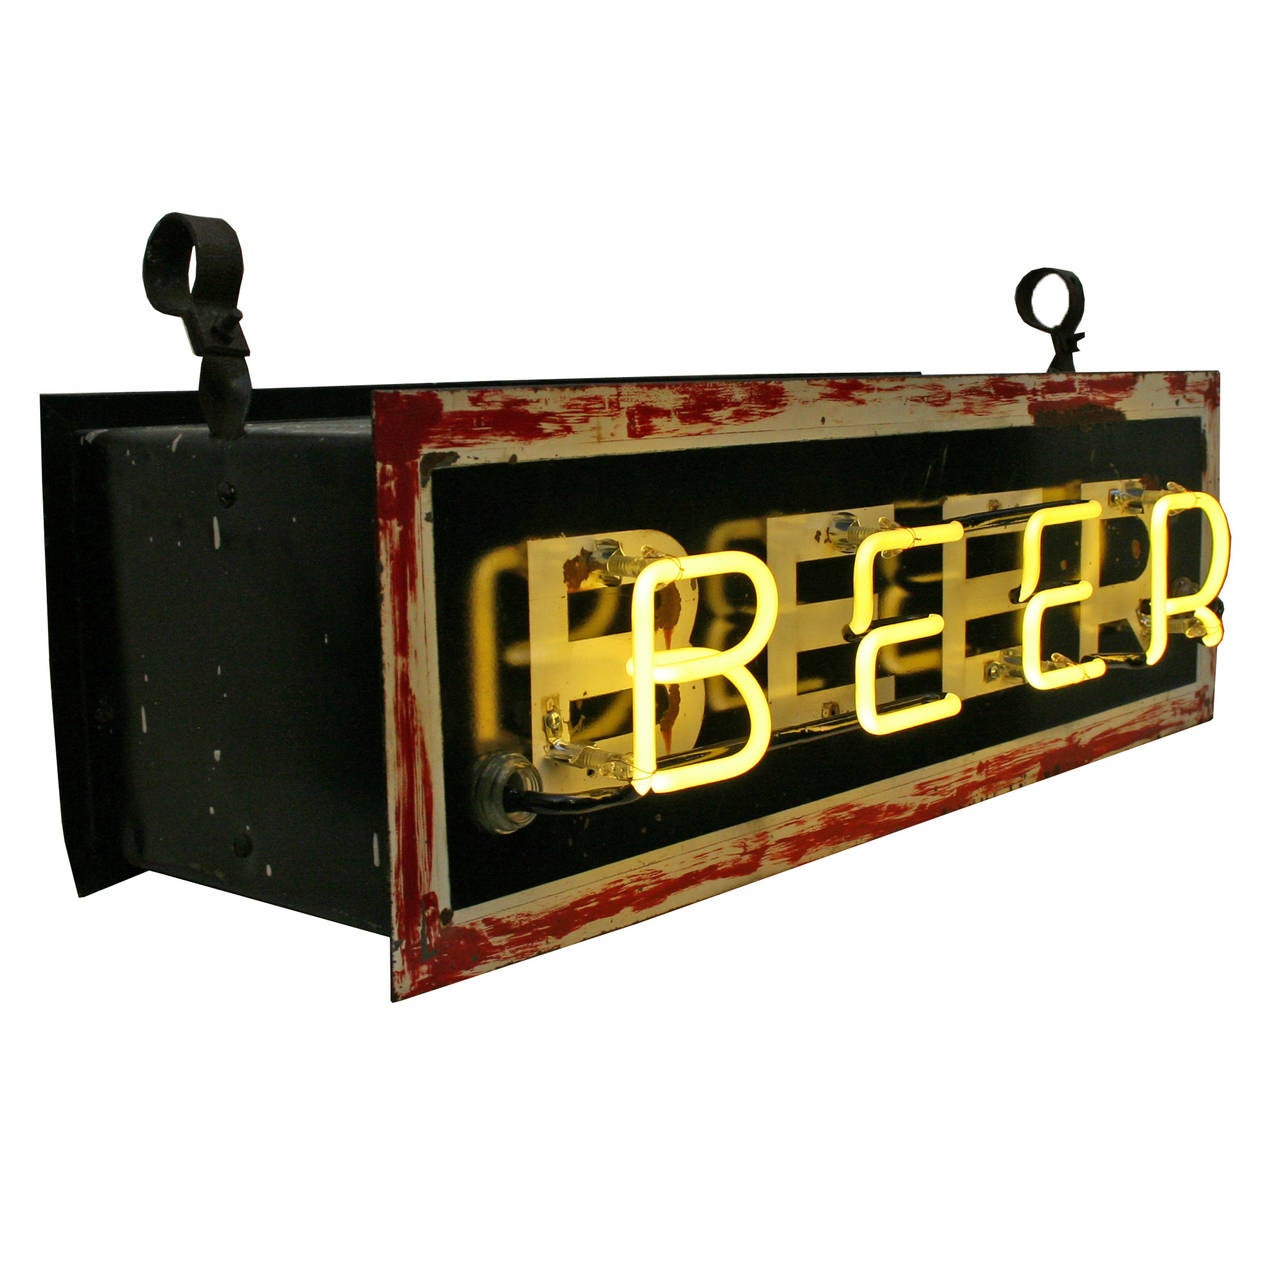 American Double-Sided Neon Beer Sign, circa 1945